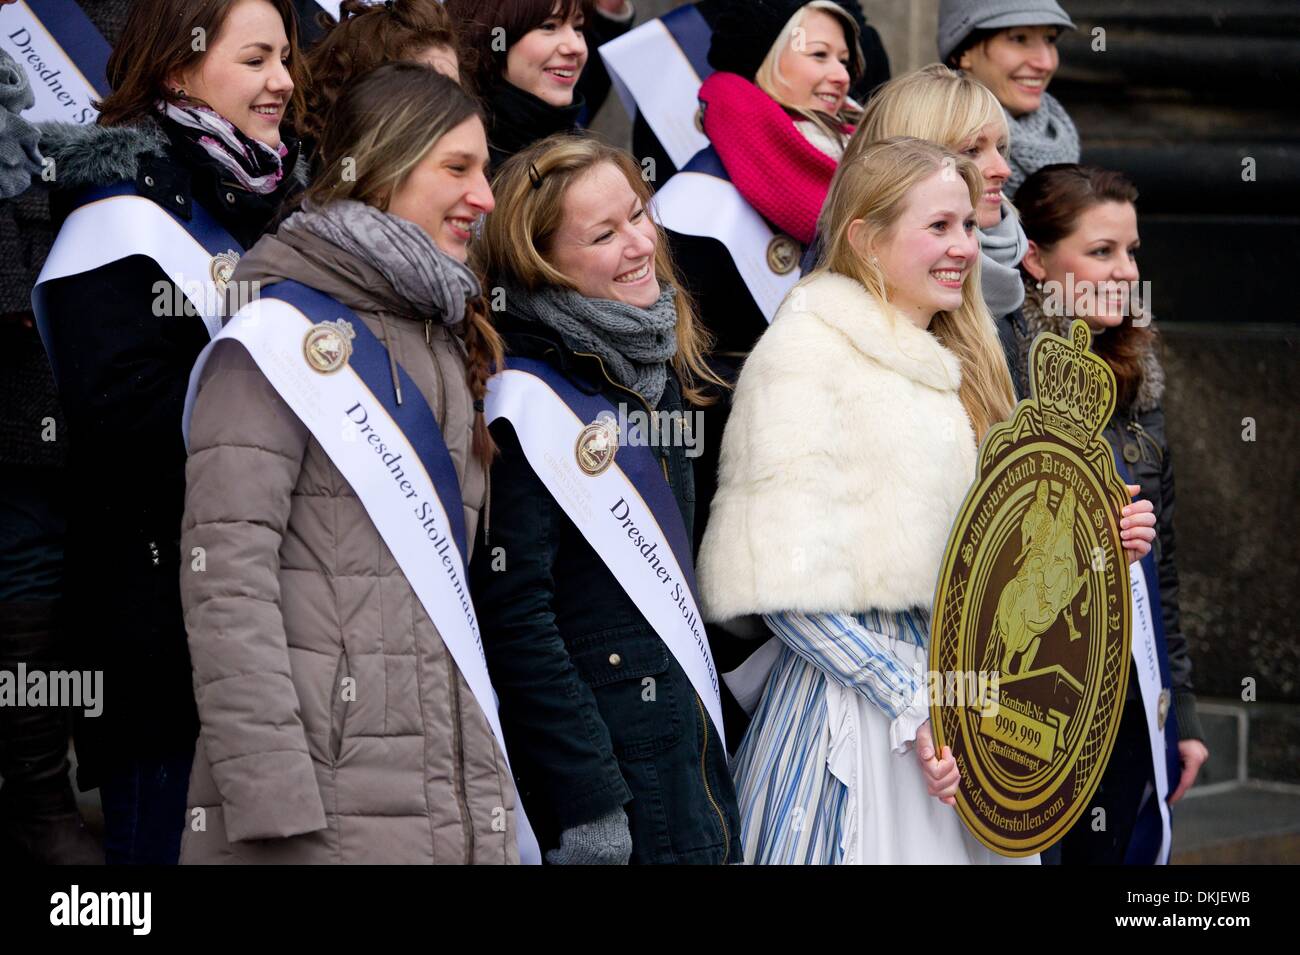 Dresden, Germany. 06th Dec, 2013. Current Dresden Stollen Girl Friederike Pohl (4-L) poses with her predecessors during the 'class reunion' of the stollen girls in Dresden, Germany, 06 December 2013. A Stollen Girl is appointed every year since the second Stollen Festival in 1995. Photo: SEBASTIAN KAHNERT/dpa/Alamy Live News Stock Photo